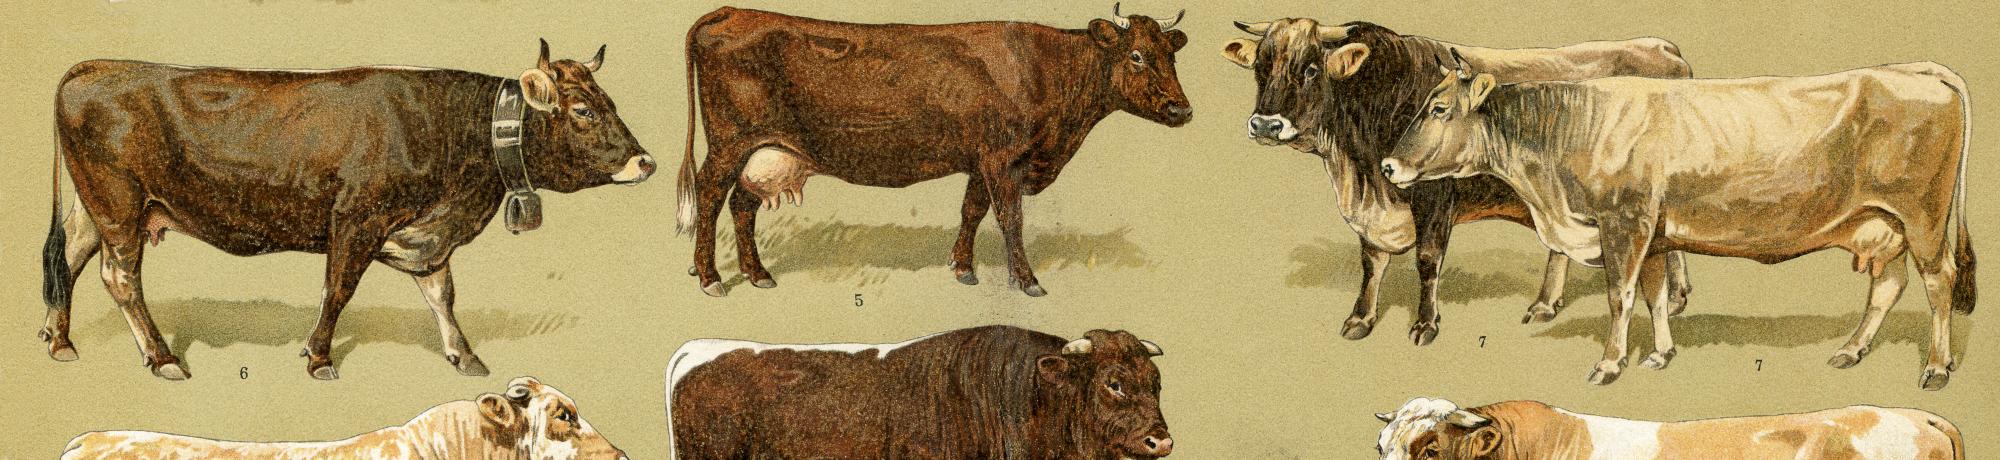 Cattle Breeds